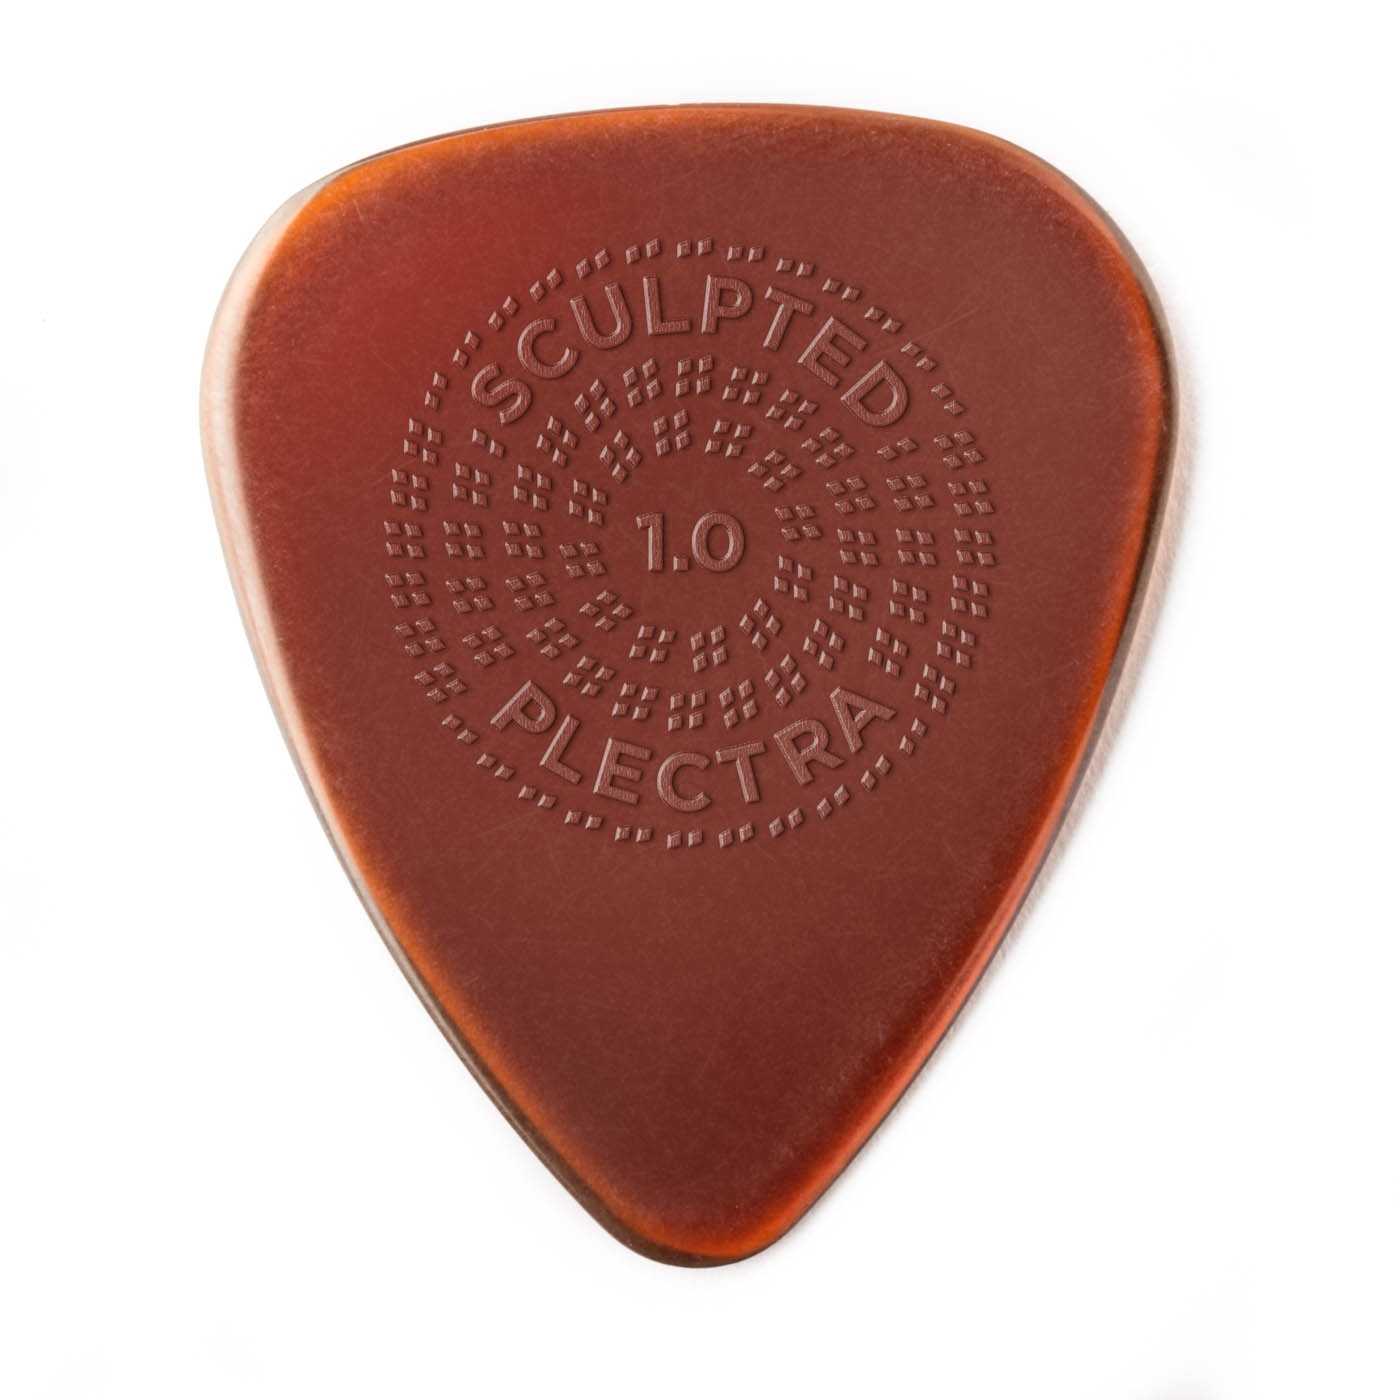 Back of Dunlop Primetone Sculpted Plectra, Ultex Standard with Grip, 1.00MM Thick, Three Pack